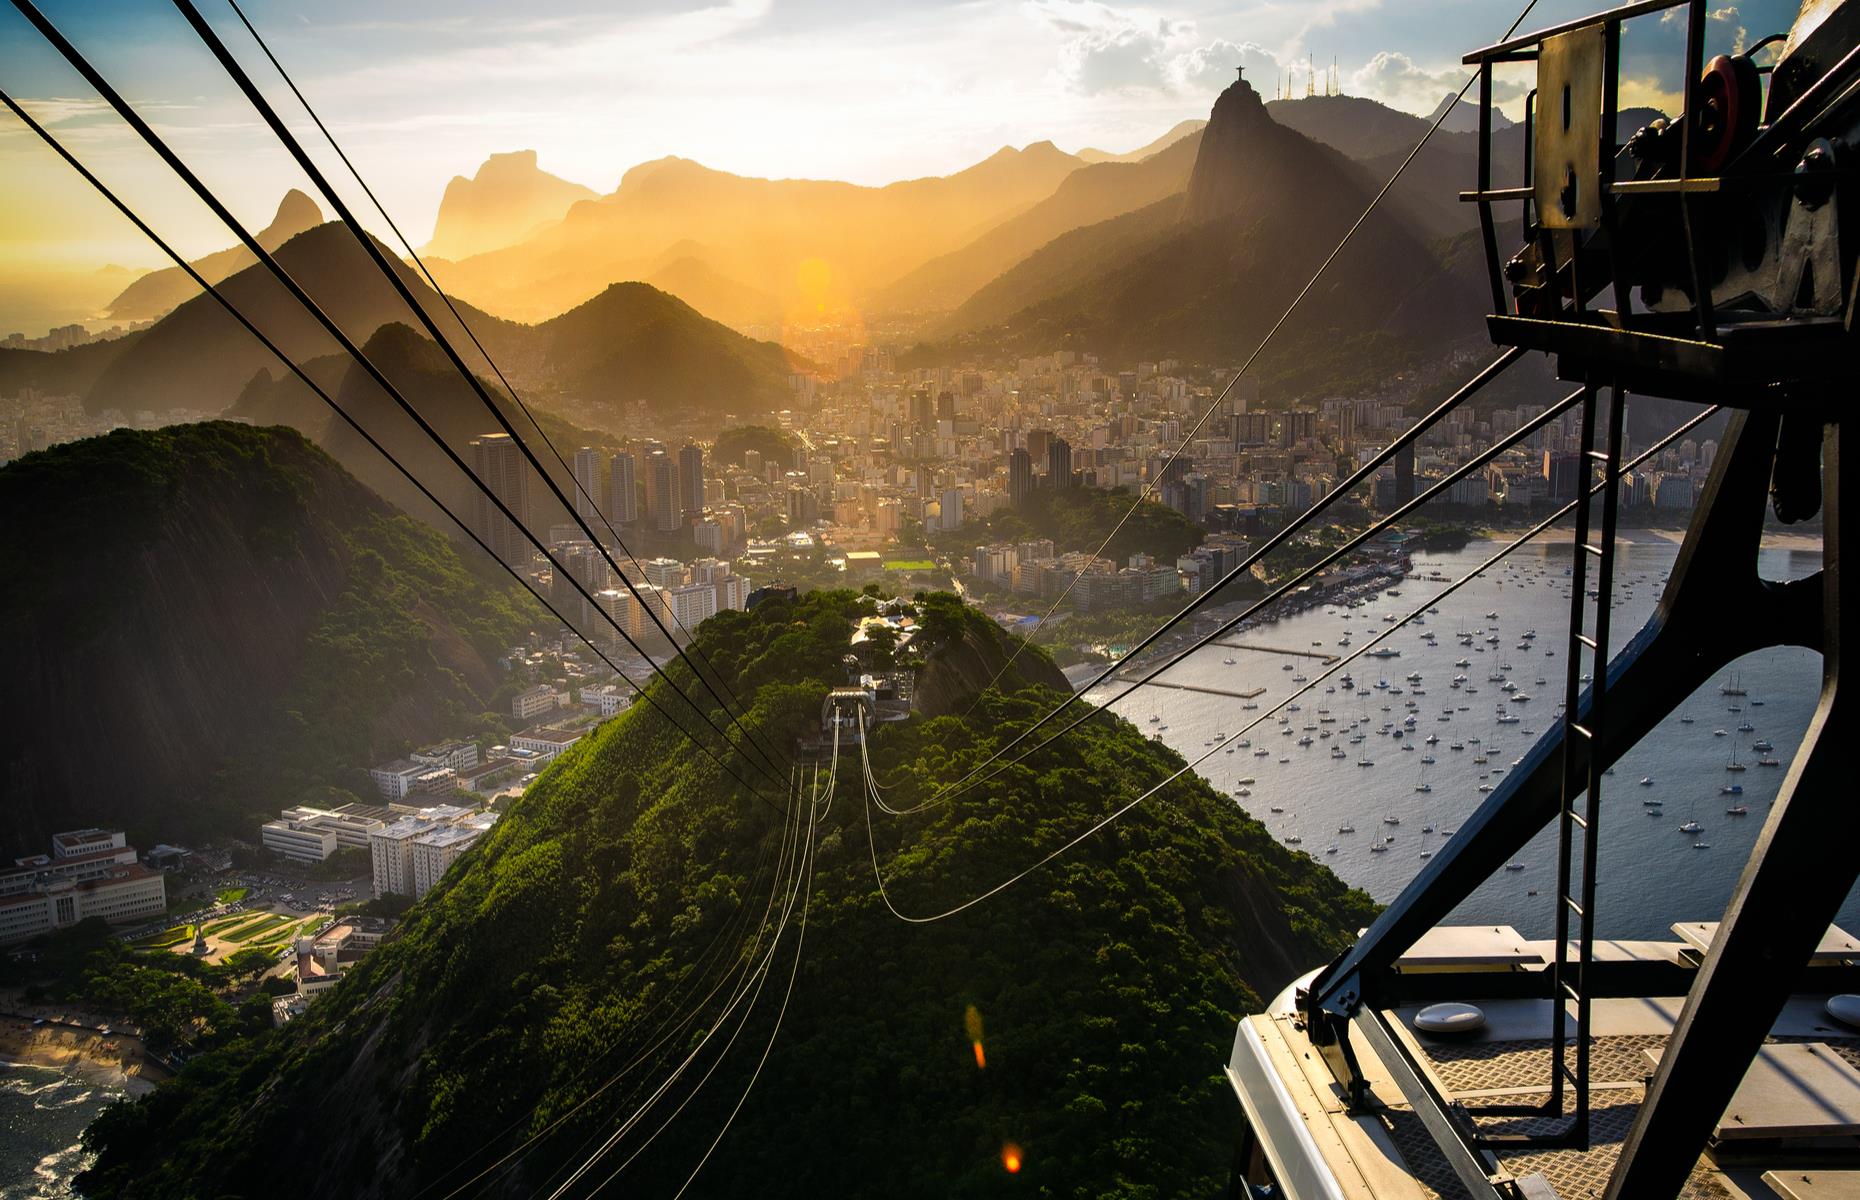 <p>Make your ascent via two cable cars, the first connecting with Morro da Urca. Knock back the first dose of coastline views here, then it’s onwards in the second cable car to Pao de Acucar. From up here, there’s no doubt about it – Rio is a cidade maravilhosa (marvelous city), as the locals claim.</p>